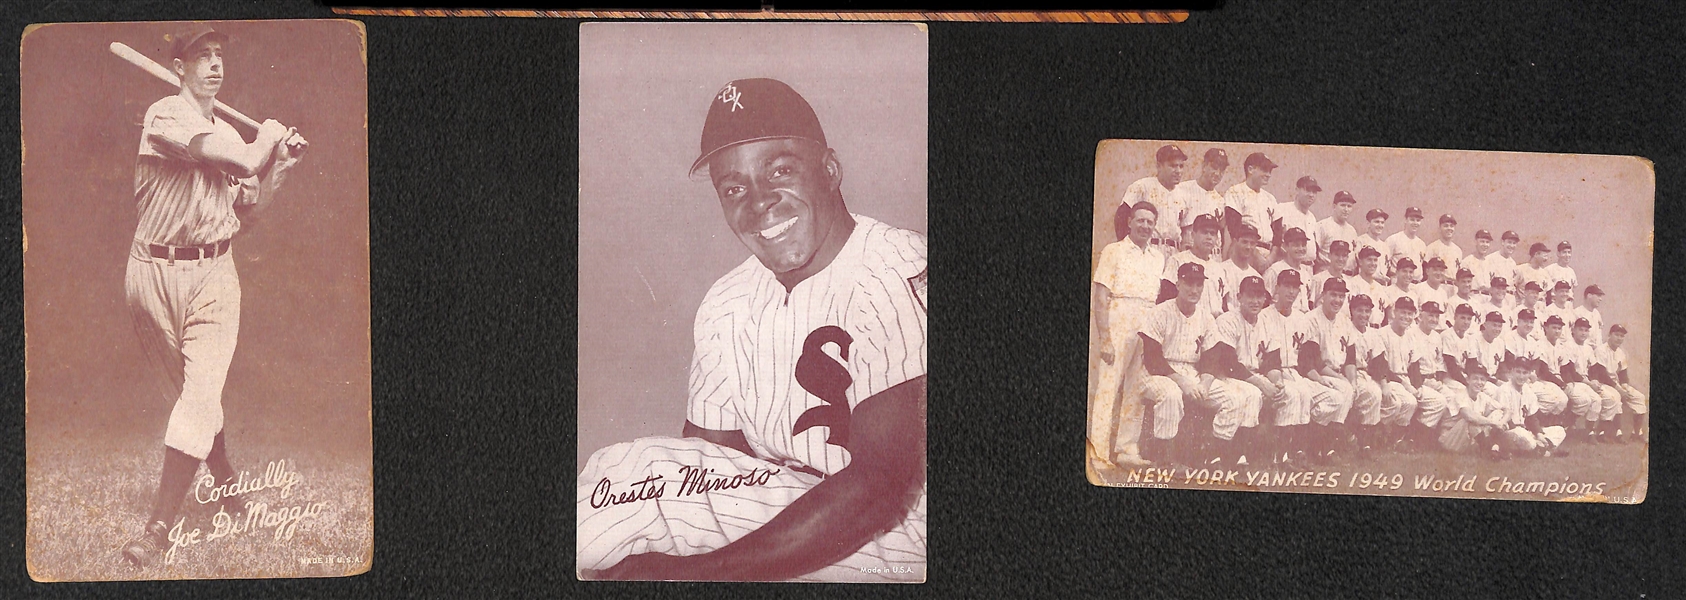 Grouping of Baseball Exhibit & HOF Plaque Cards - 1950-1990's